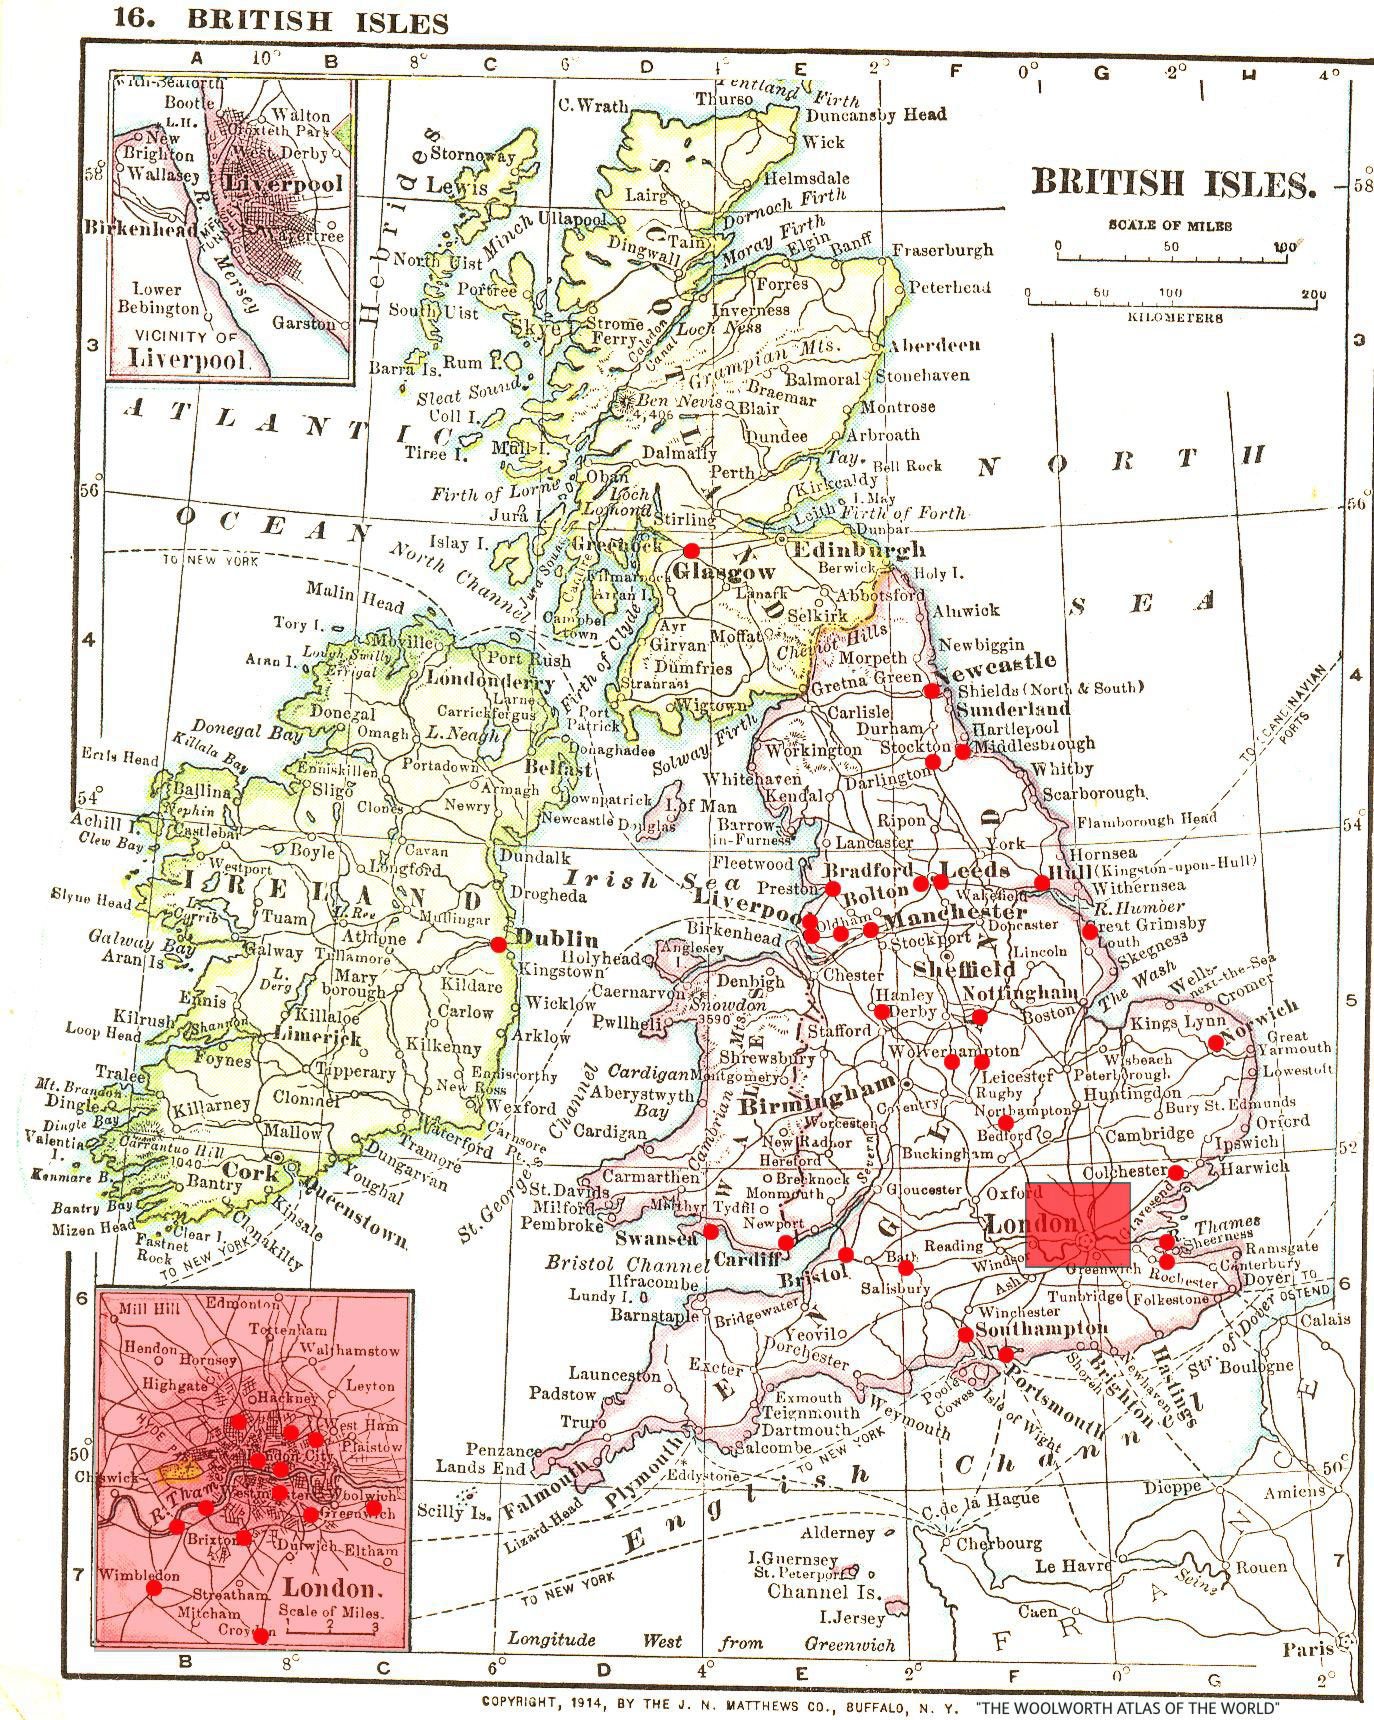 Map showing the locations of the first 44 Woolworth stores across the British Isles. These branches opened between 1909 and 1914.  Adapted from "The Woolworth Atlas of the World" (1914)  published for the company by J.N. Matthews Co. of Buffalo, NY.